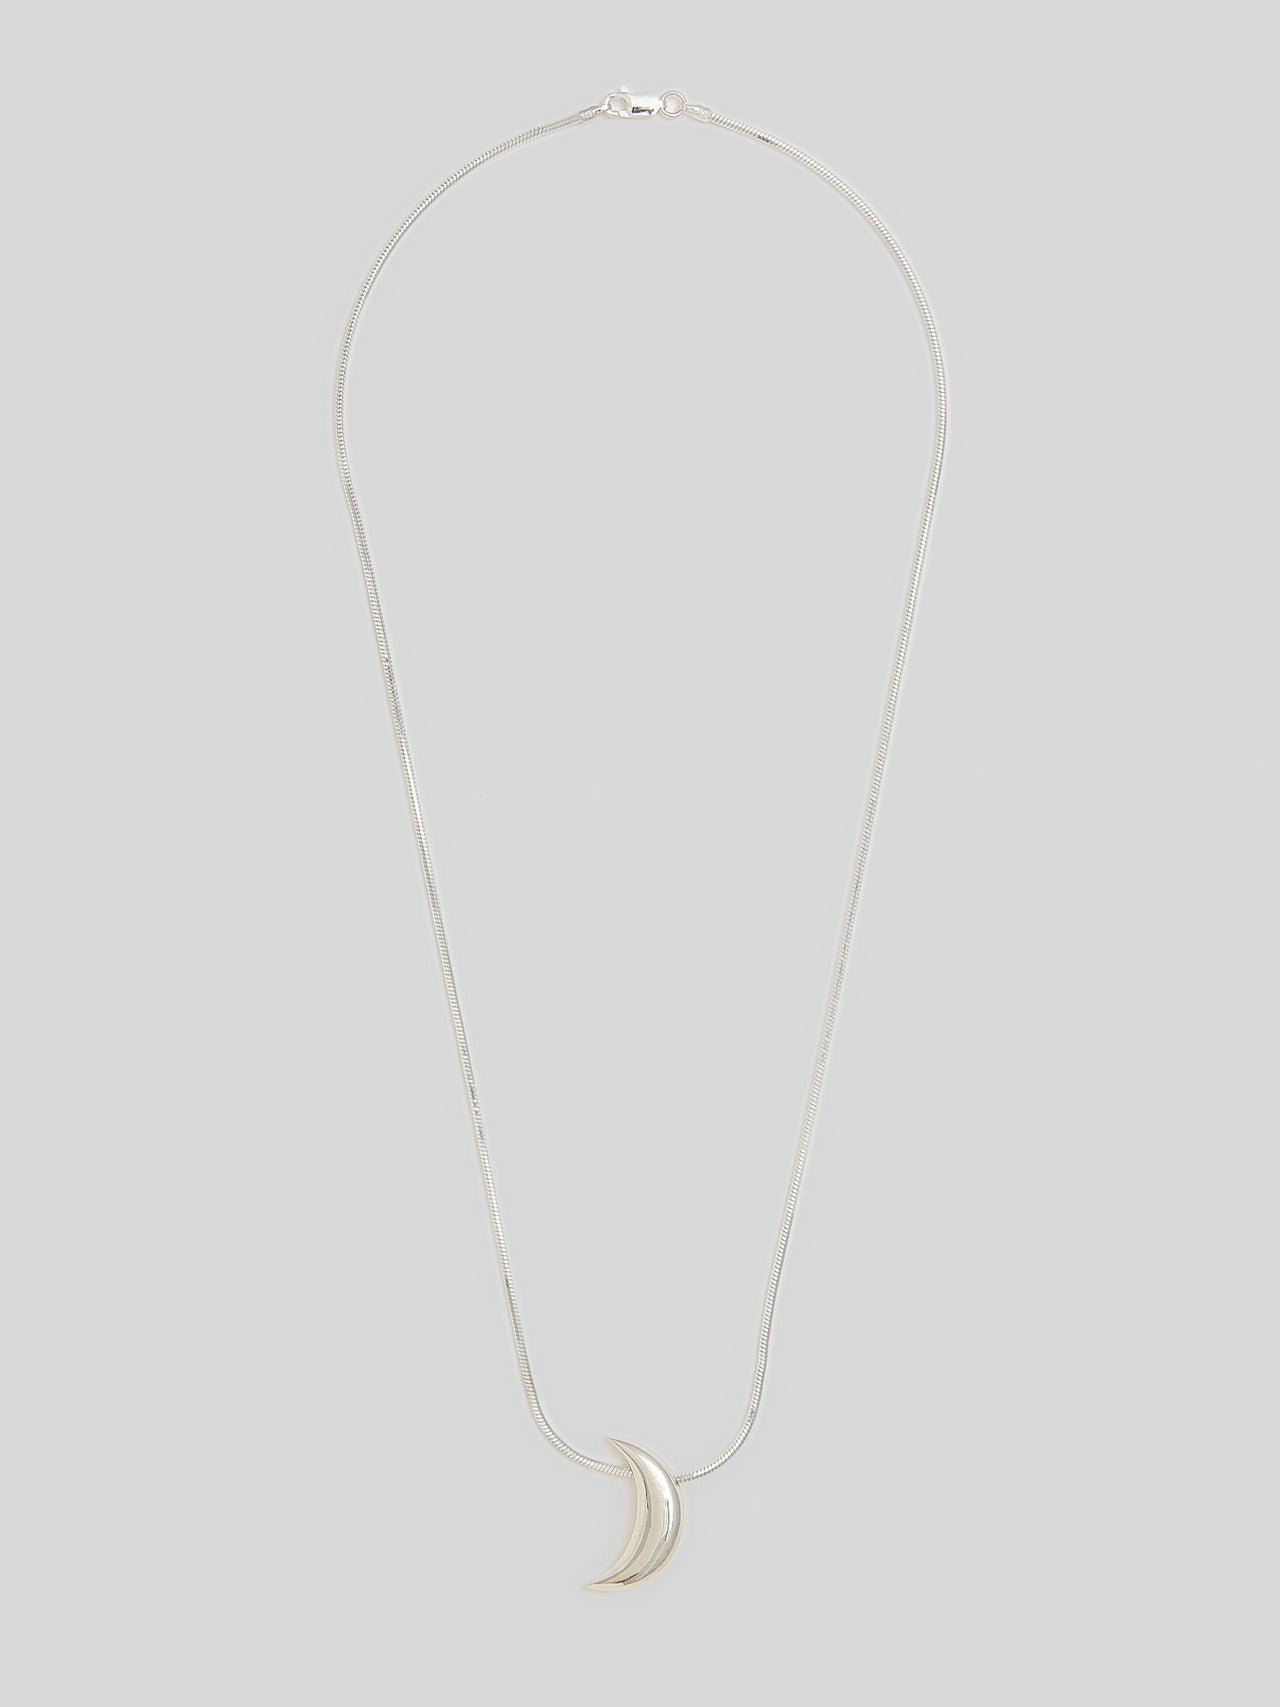 Product image of sterling silver snake chain necklacw with Silver Crescent moon pendant on white background. 